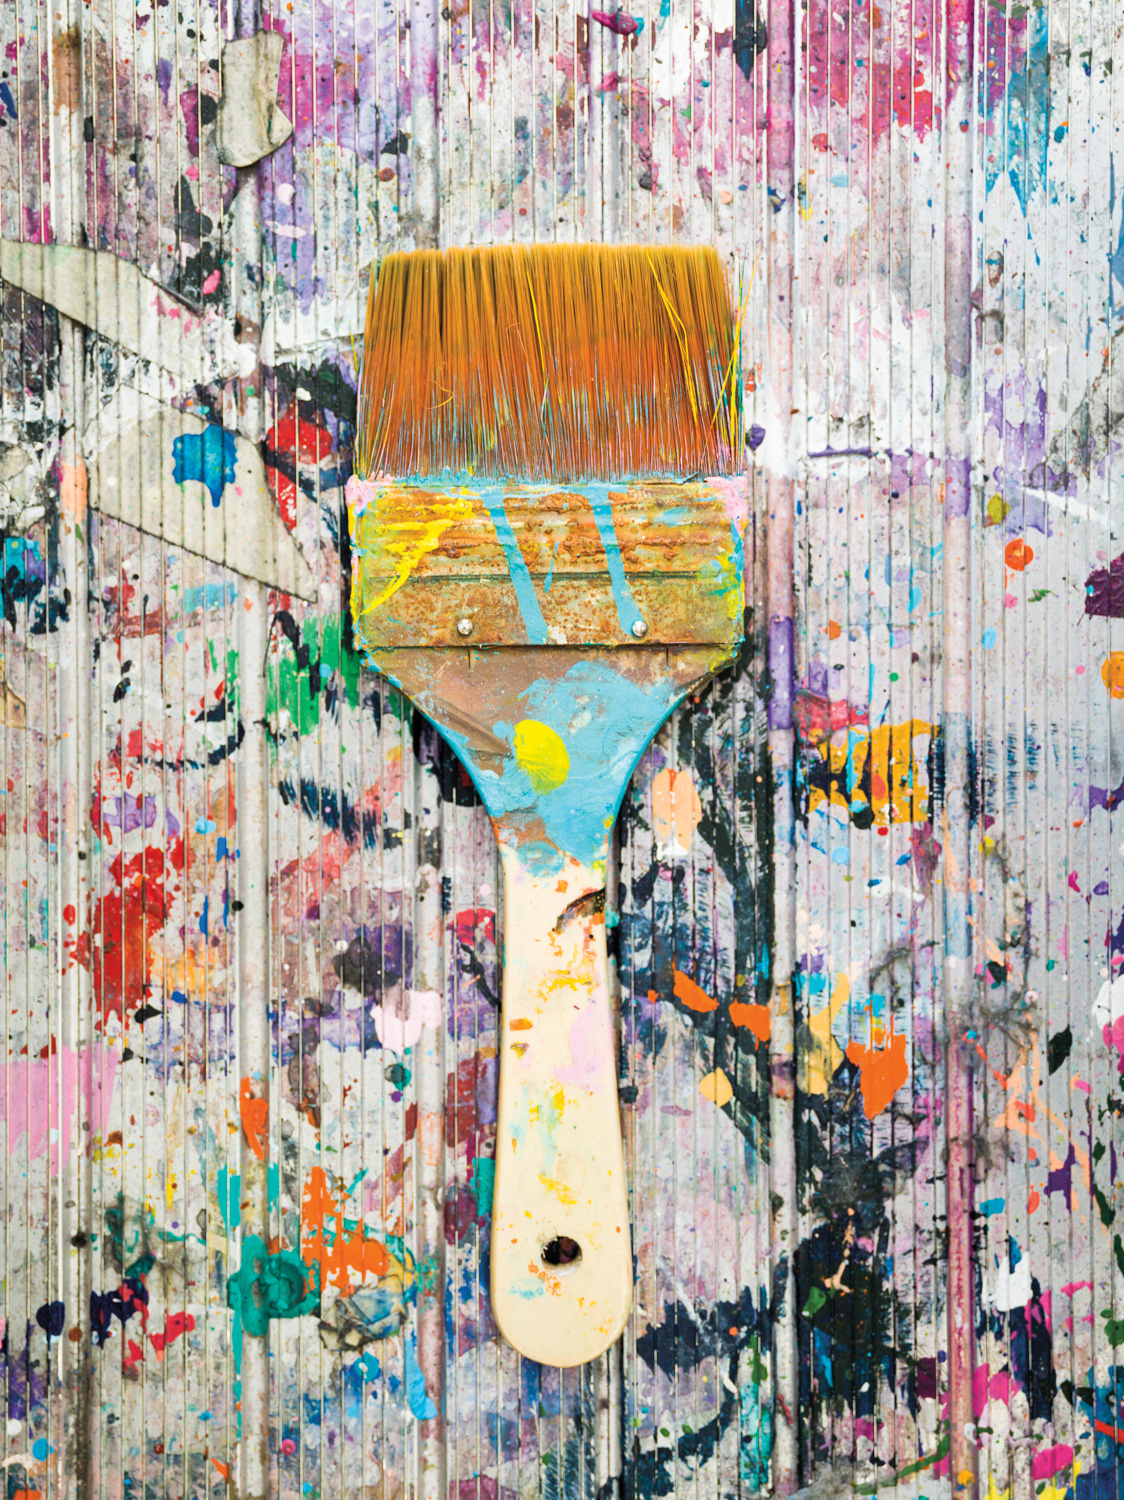 wide paintbrush covered in stripes of paint, against a paint splattered striped surface